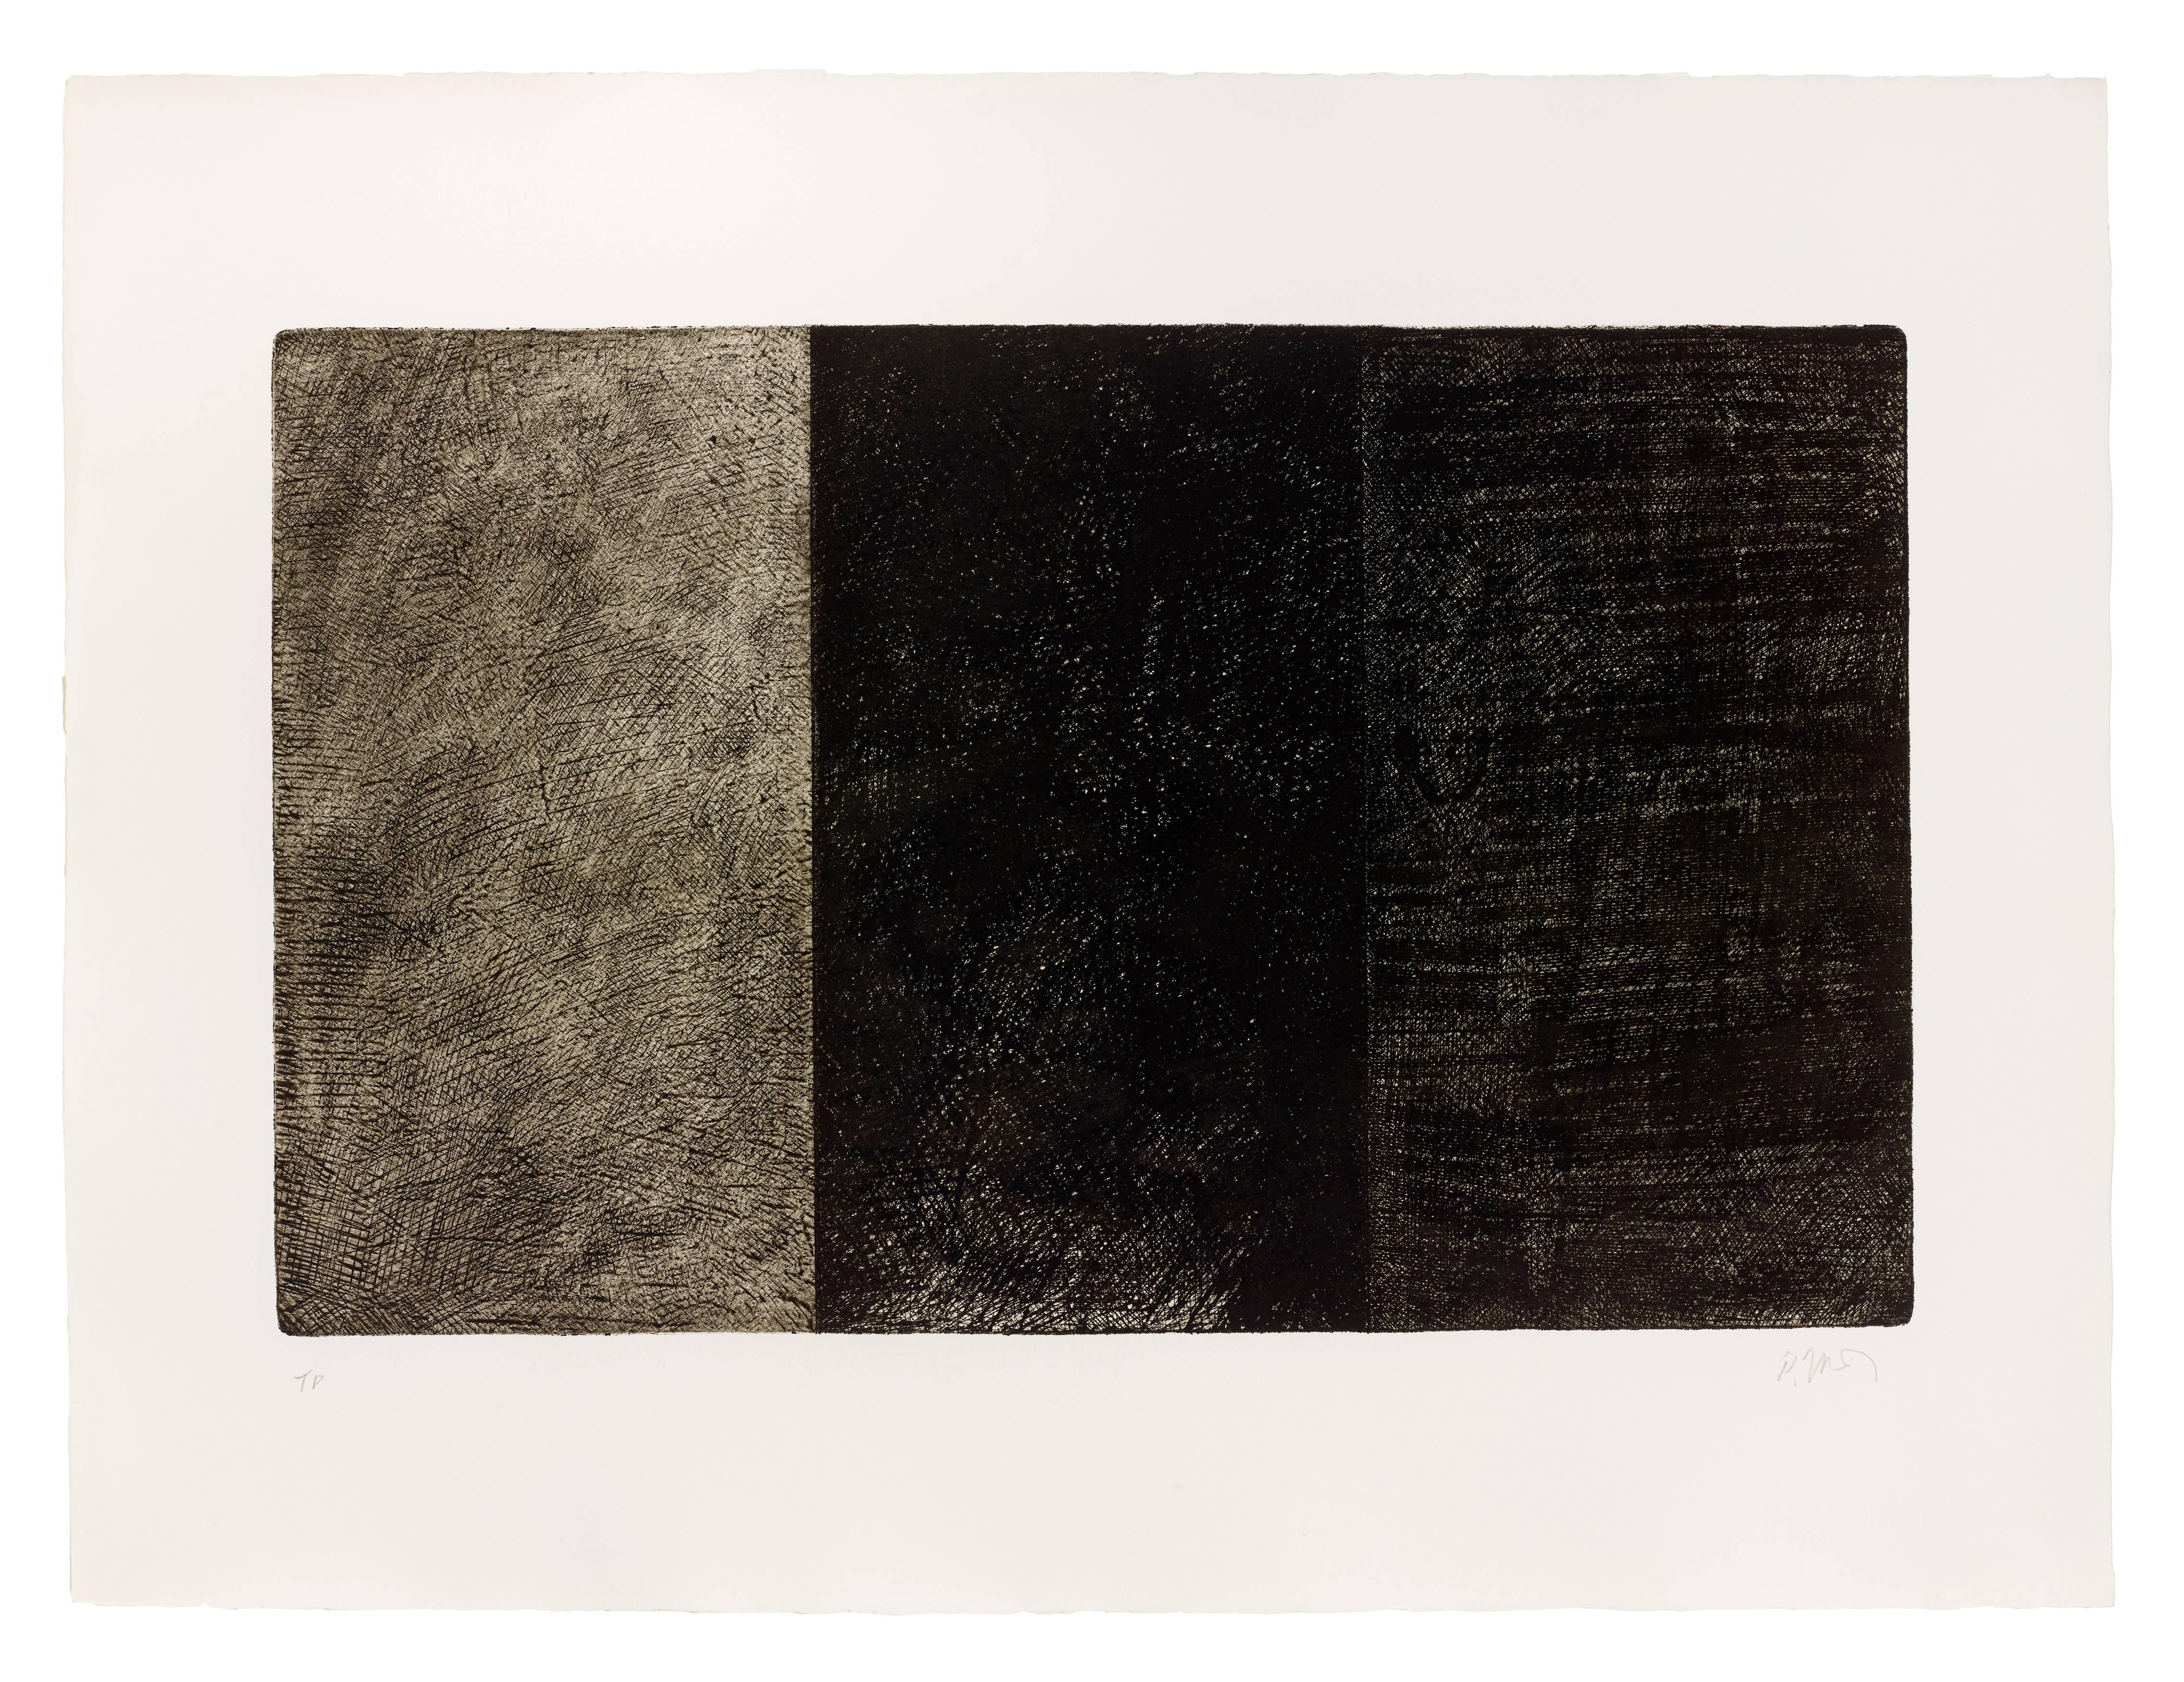 Untitled - Print by Brice Marden